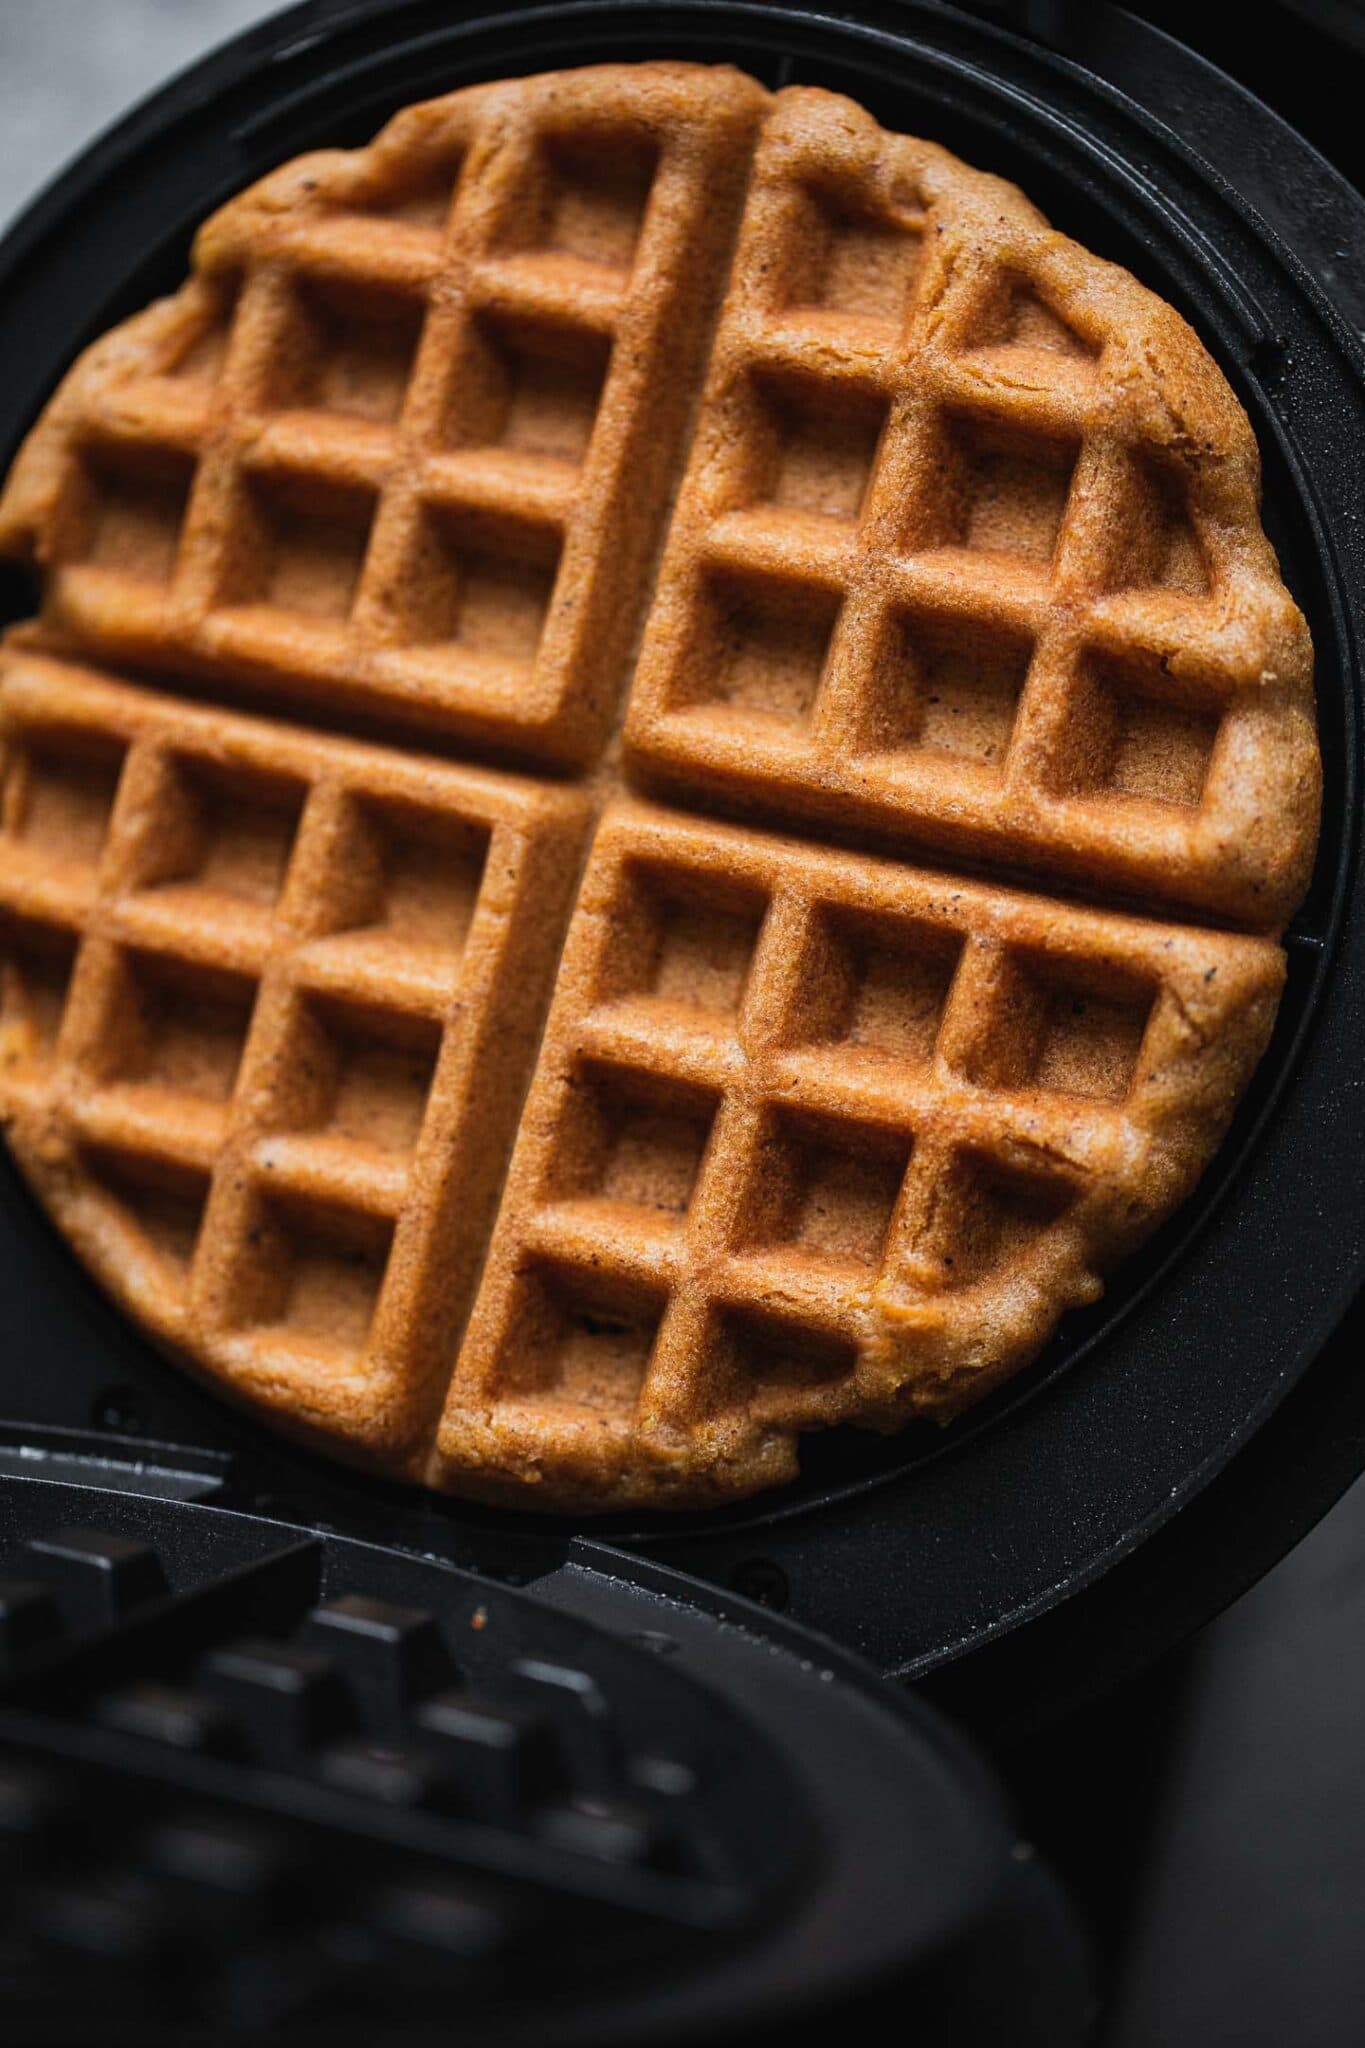 cooking waffles in the waffle iron